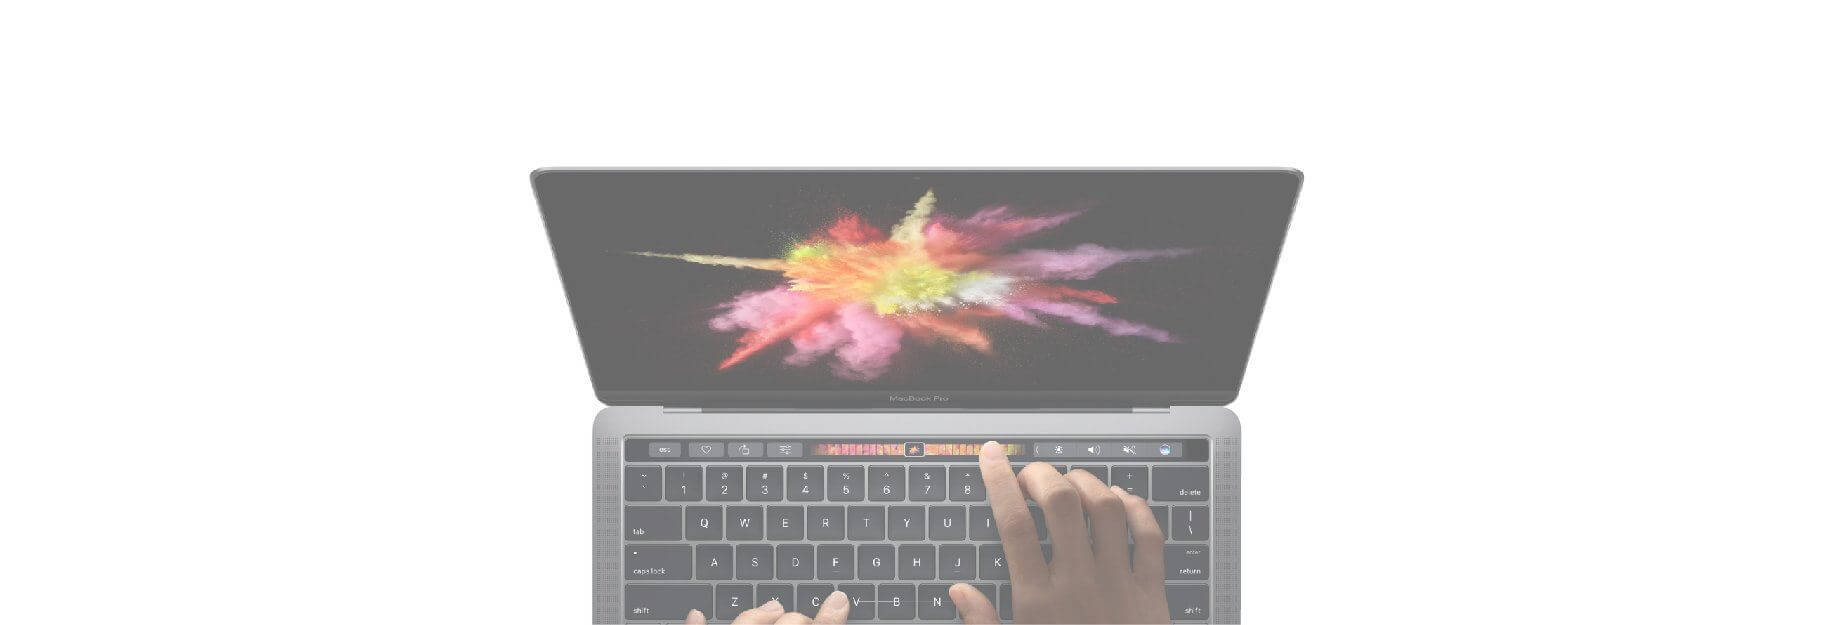 How to screenshot the Touch Bar on the MacBook Pro